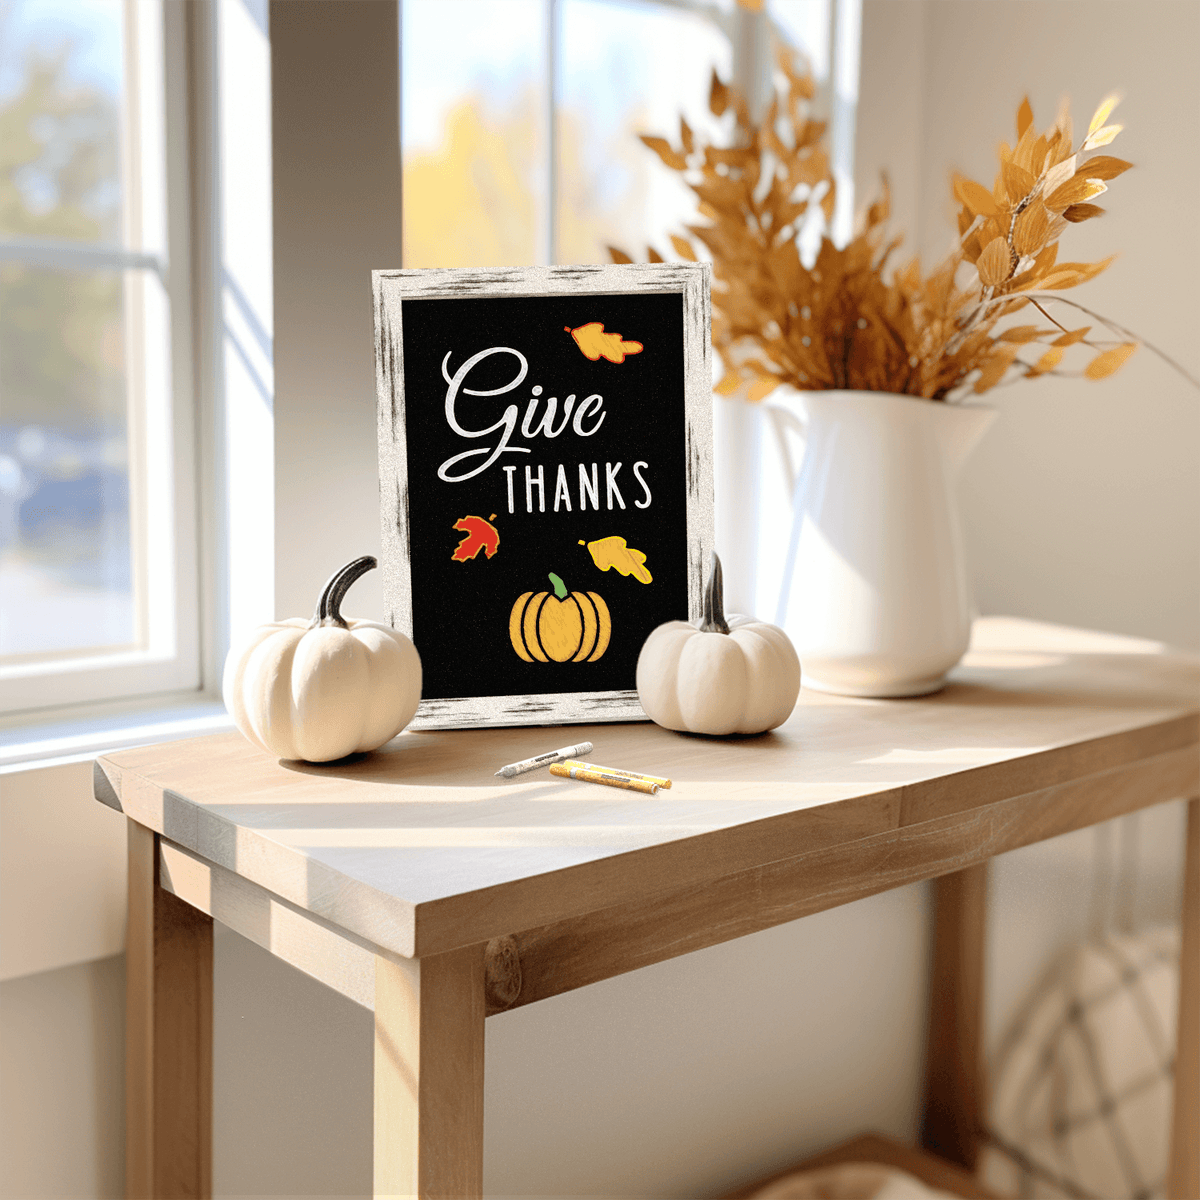 Give Thanks Thanksgiving chalkboard sign crafted with Plata Chalkboards framed chalkboard and magnetic letter stencils craft kit for DIY Thanksgiving sign